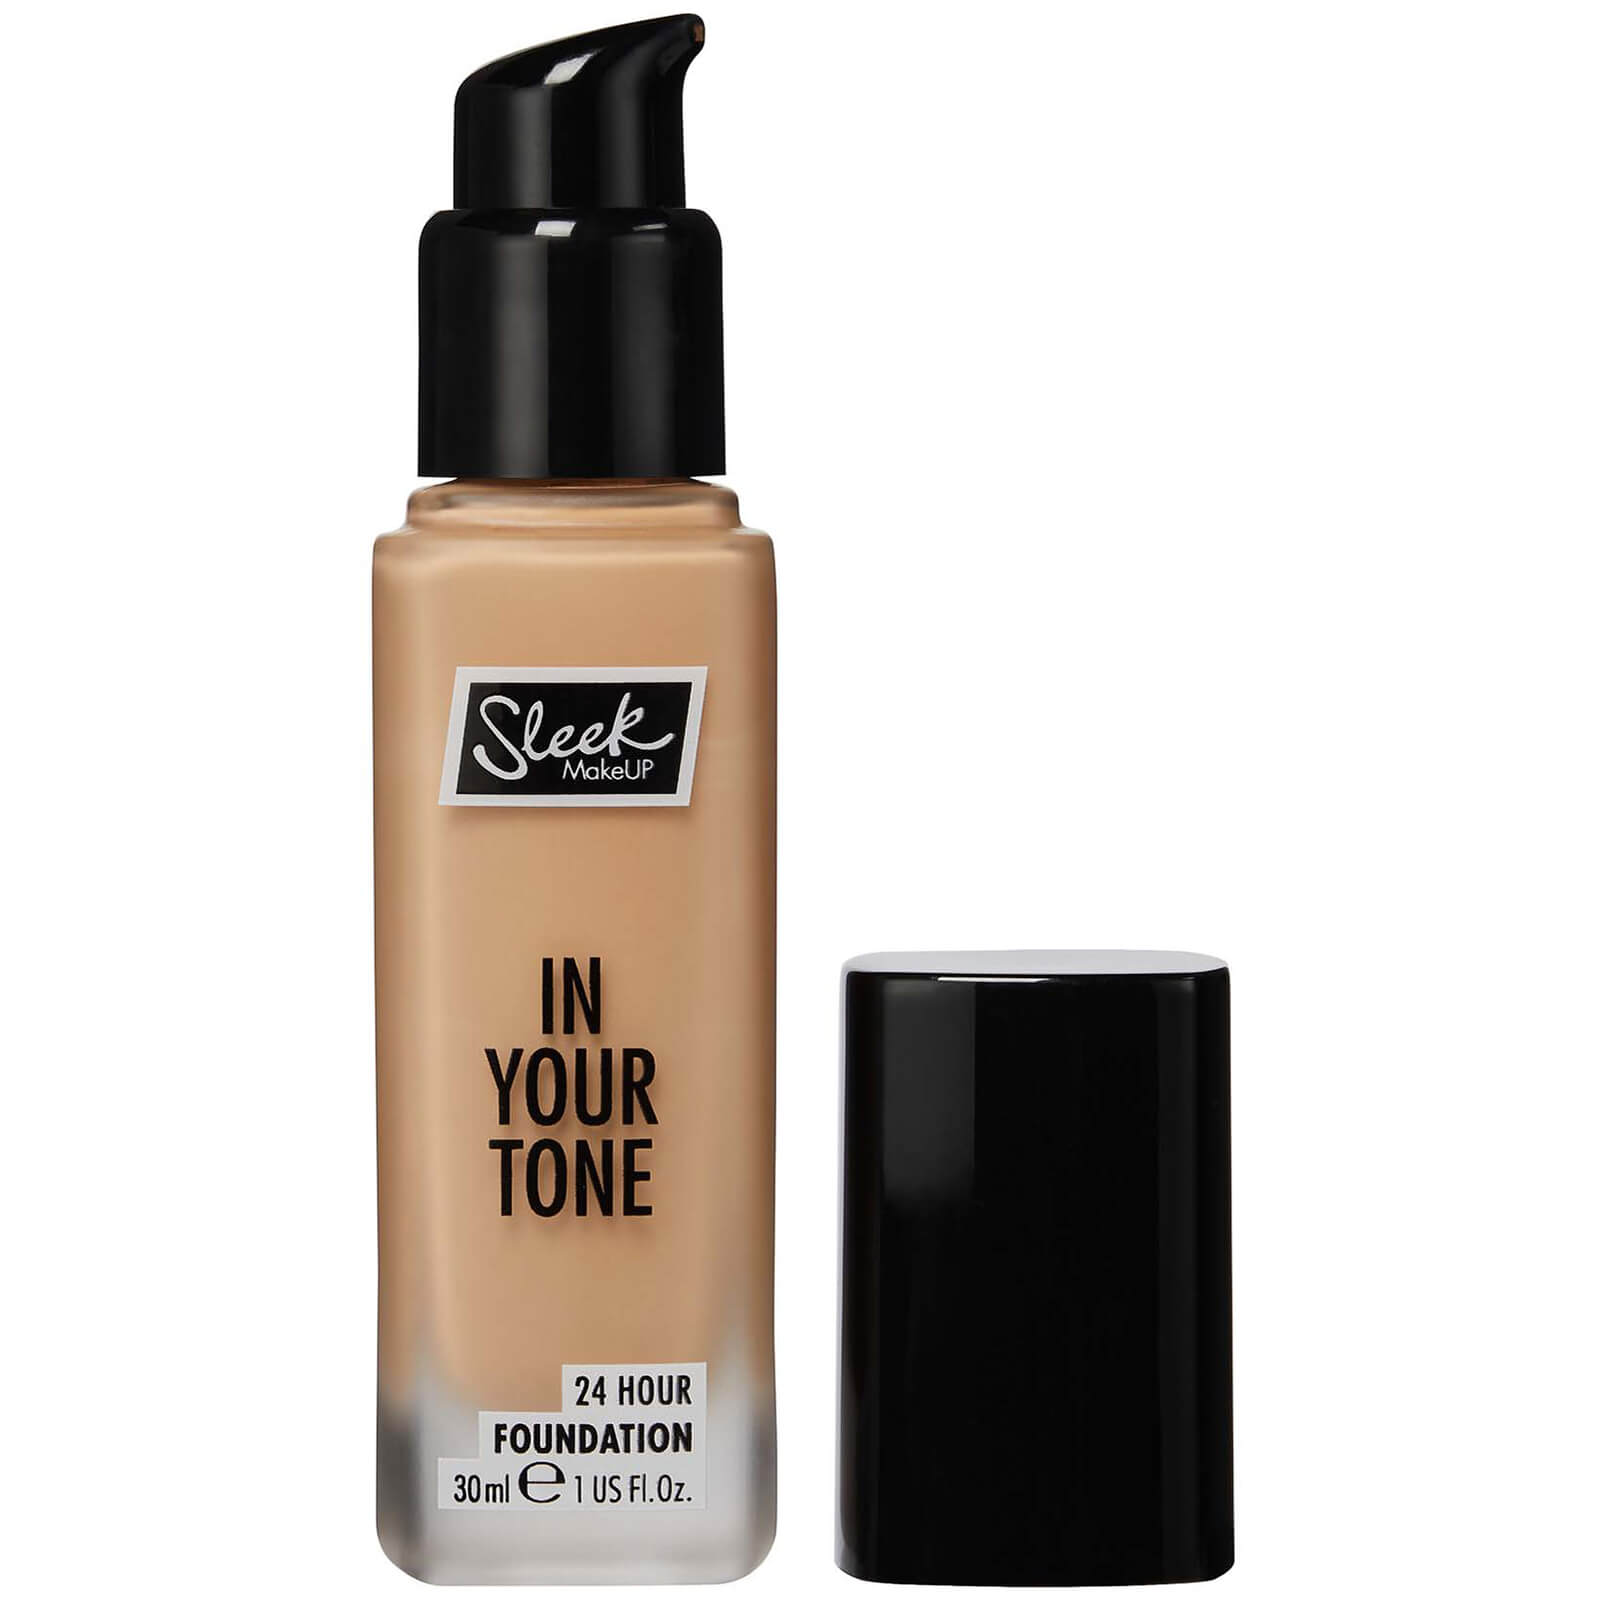 Sleek MakeUP in Your Tone 24 Hour Foundation 30ml (Various Shades) - 5N